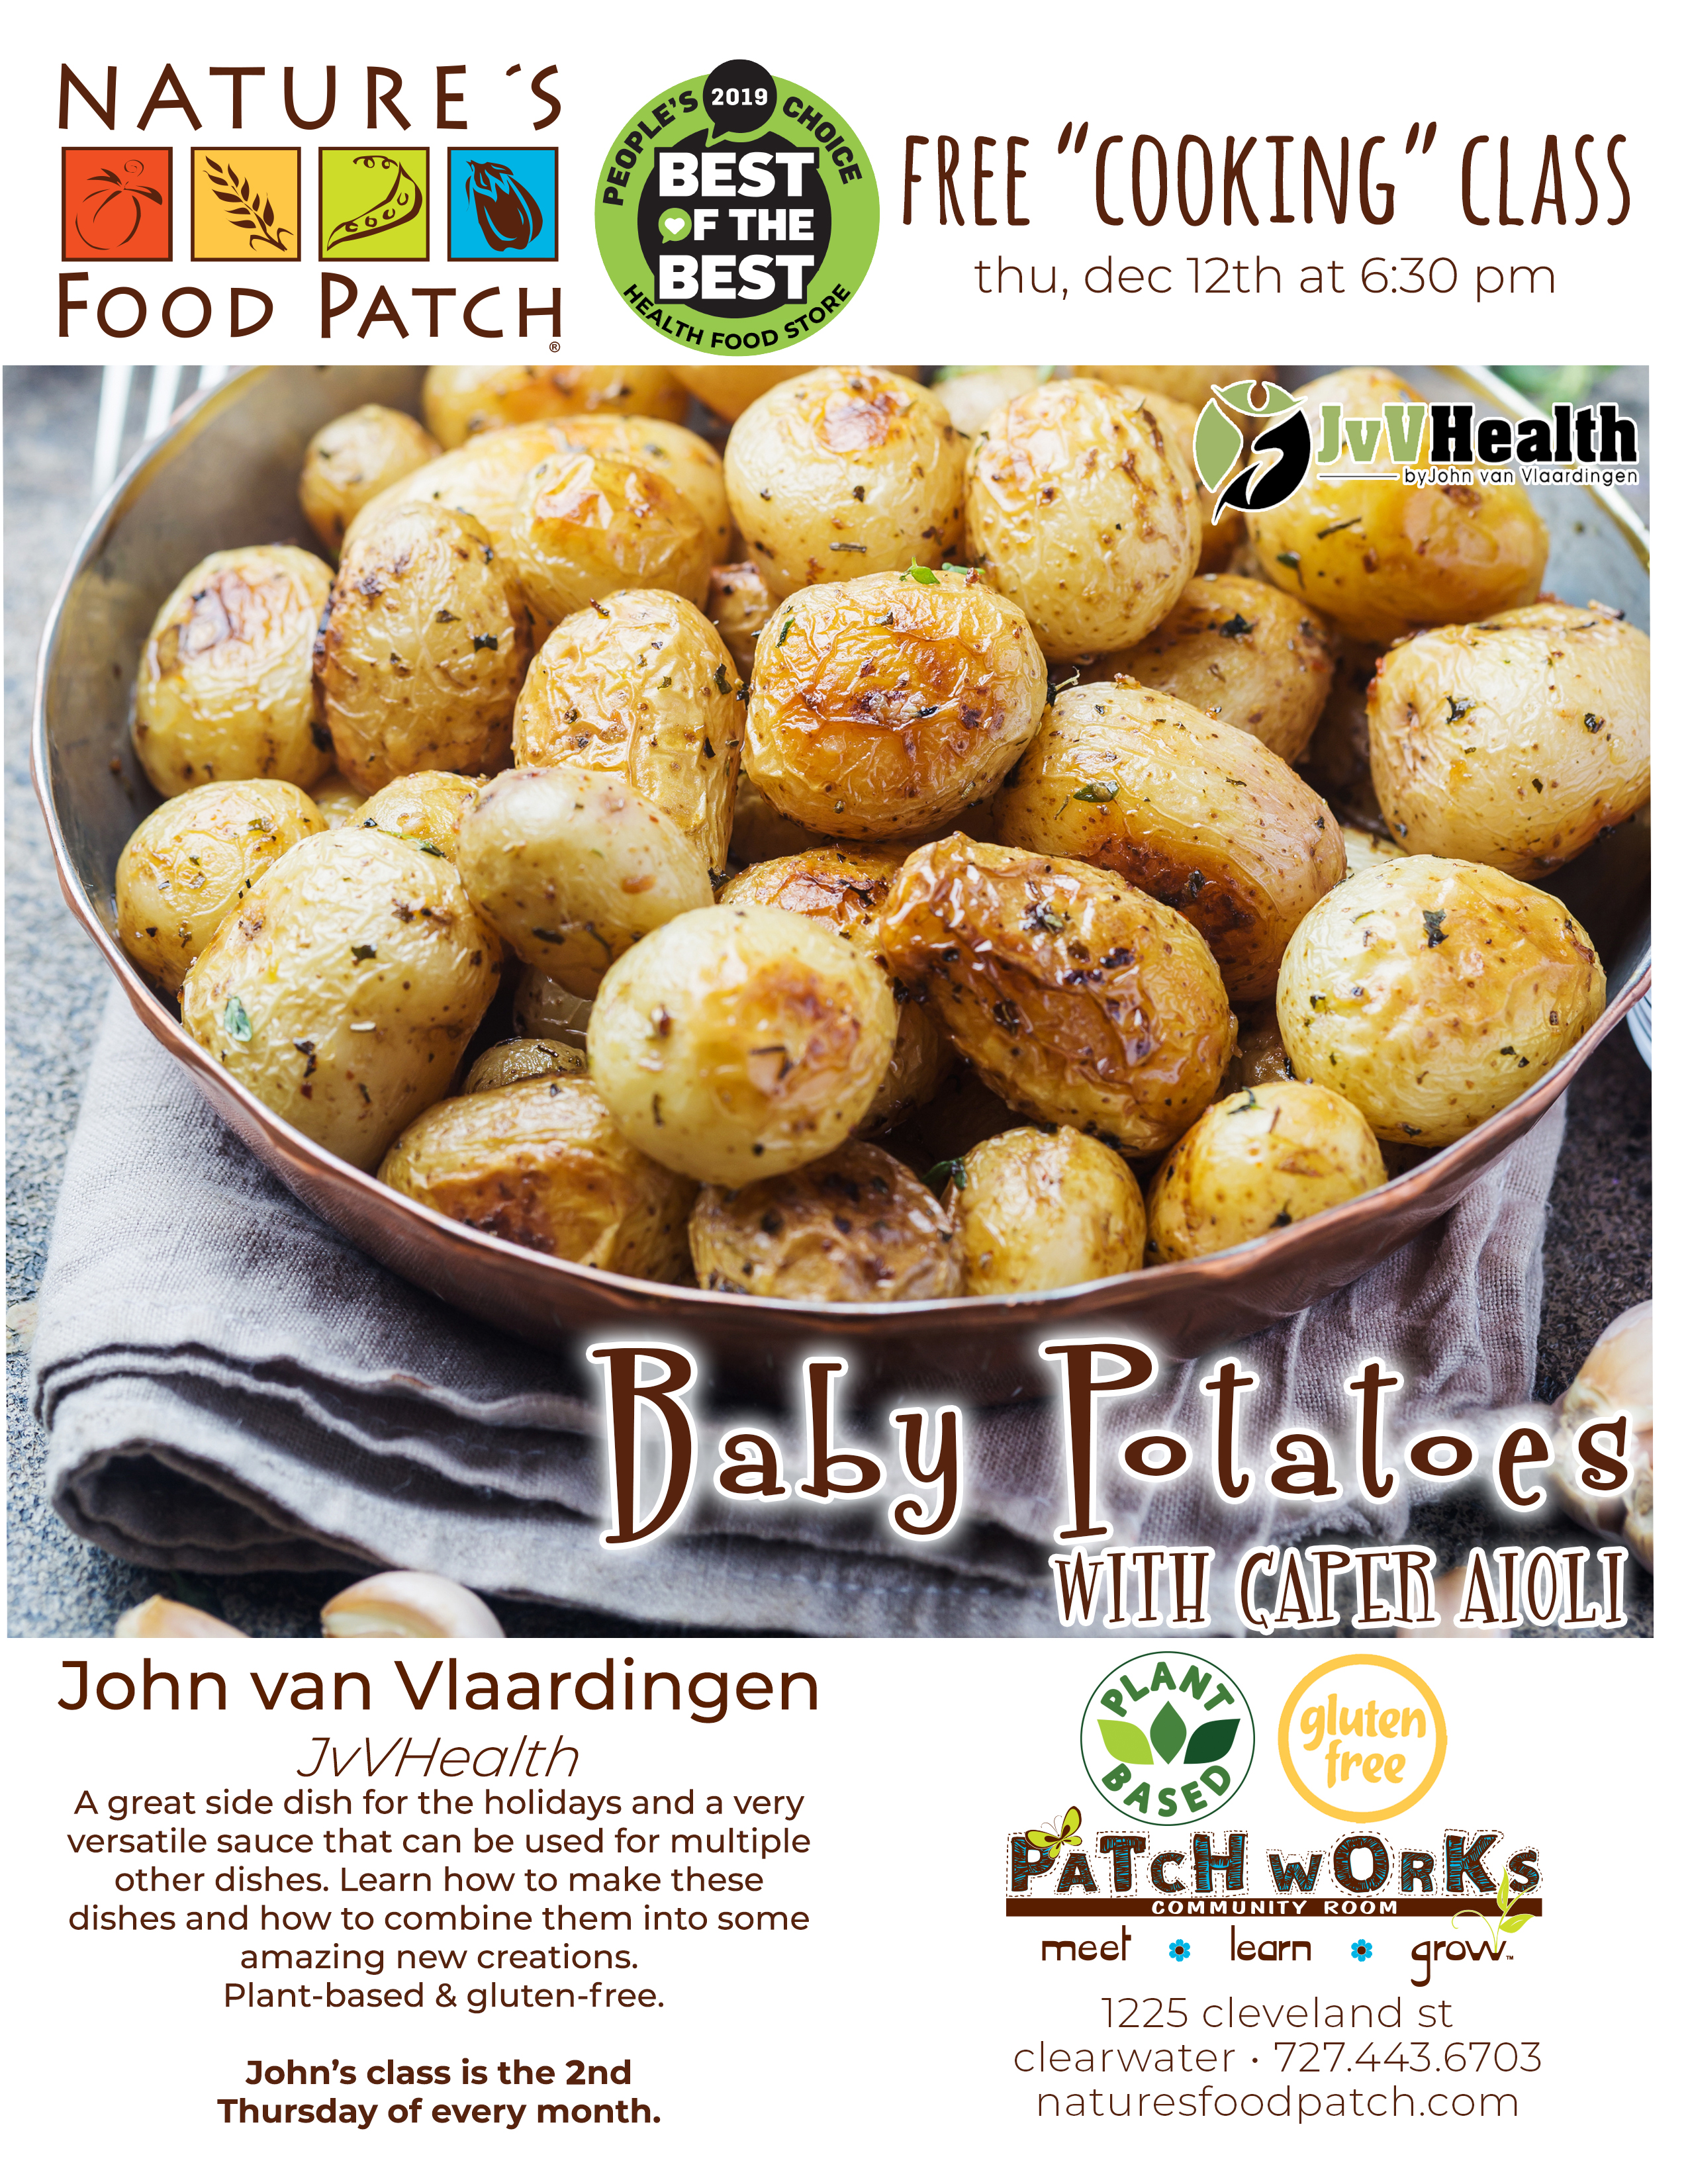 Baby Potatoes with Caper Aioli